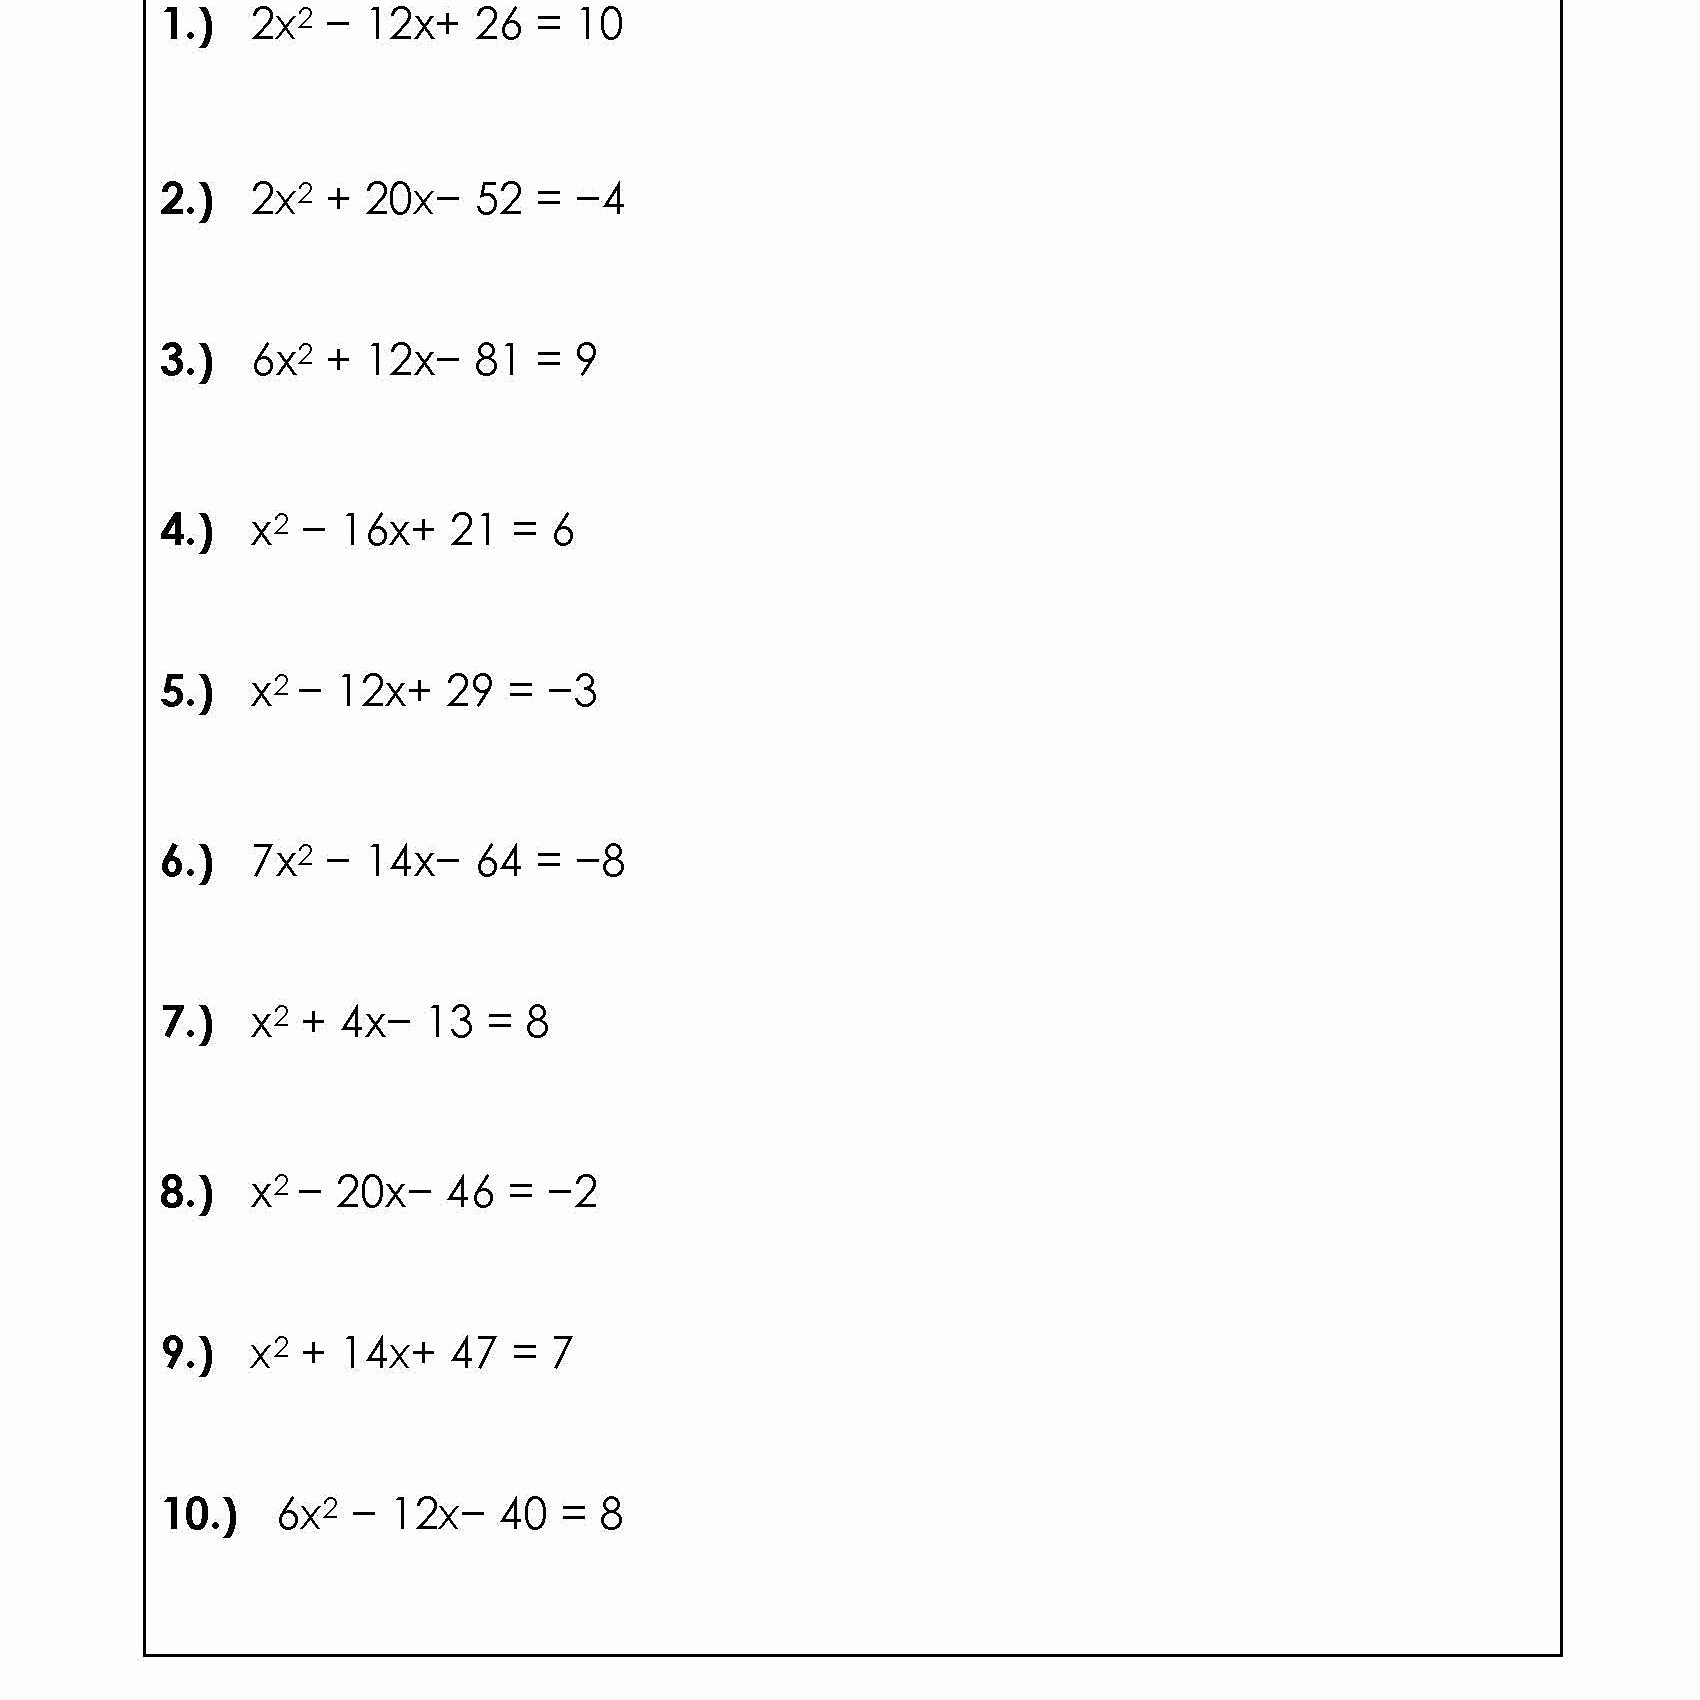 Complete the Square Worksheet Awesome solve Quadratic Equations by Peting the Square Worksheets